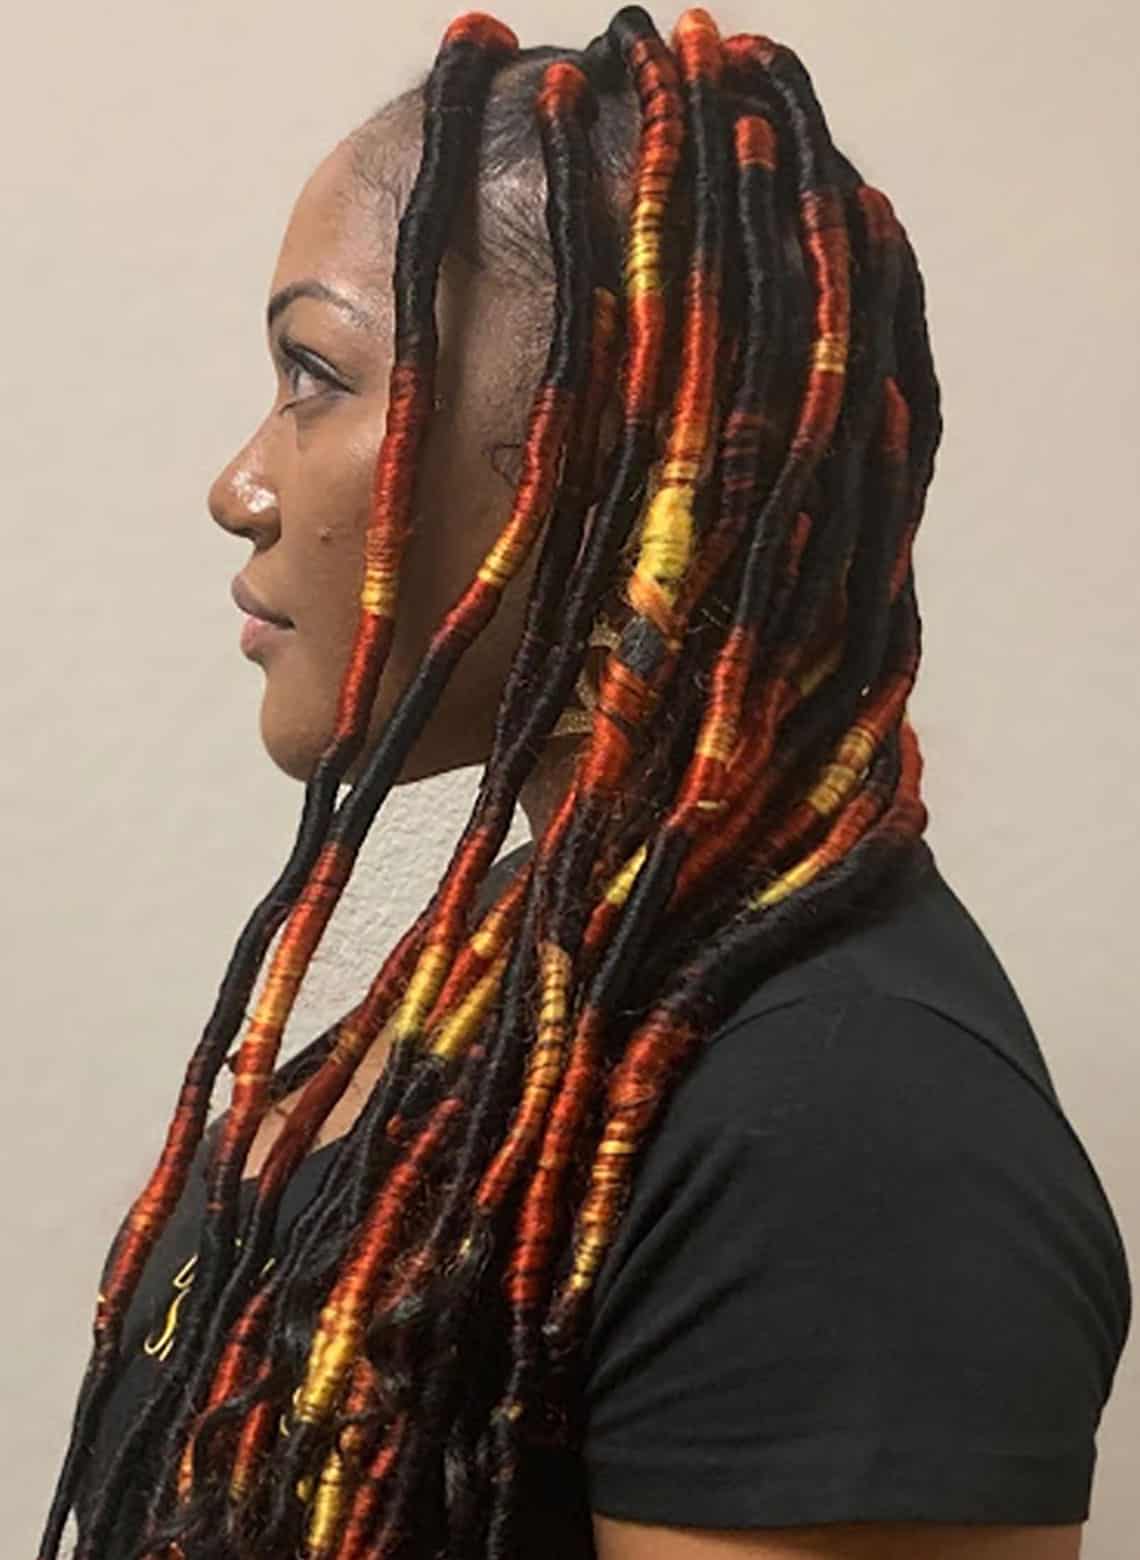 27 Dread Styles to Liven Up Your Look - StyleSeat